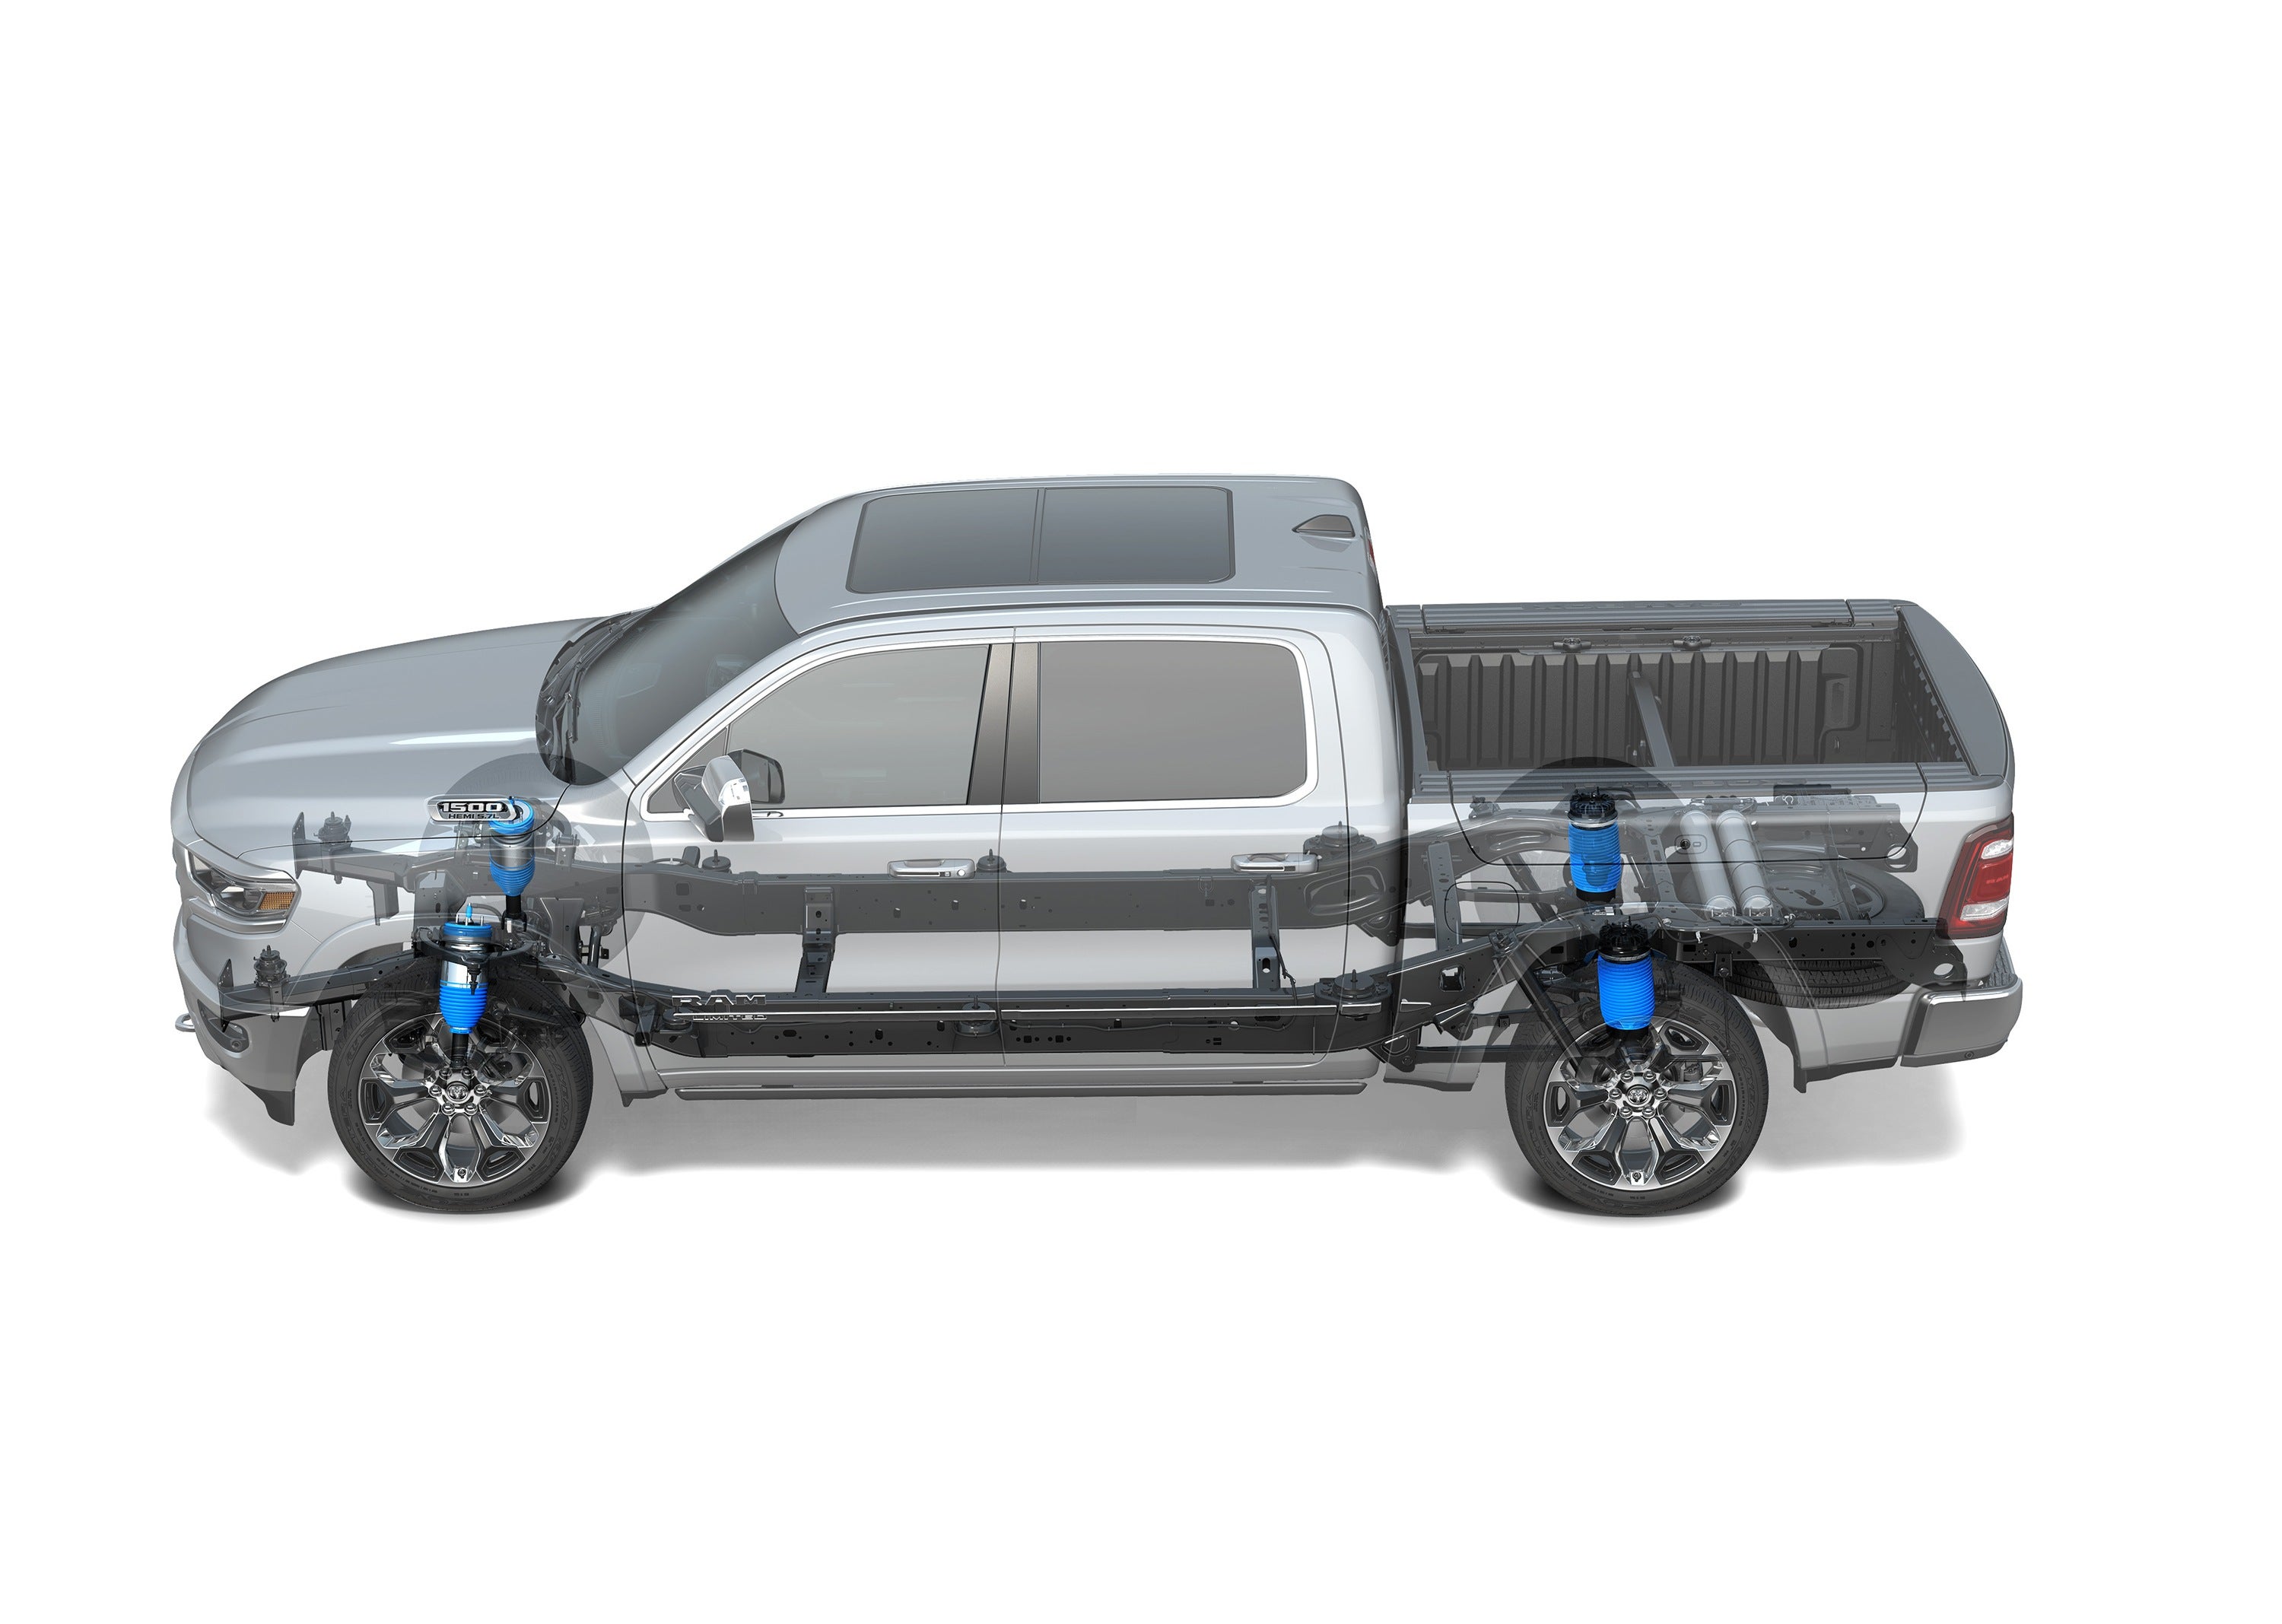 2019 Ram 1500 4x4 Off-Road Package, Rebel are Dirt Ready | Off-Road.com